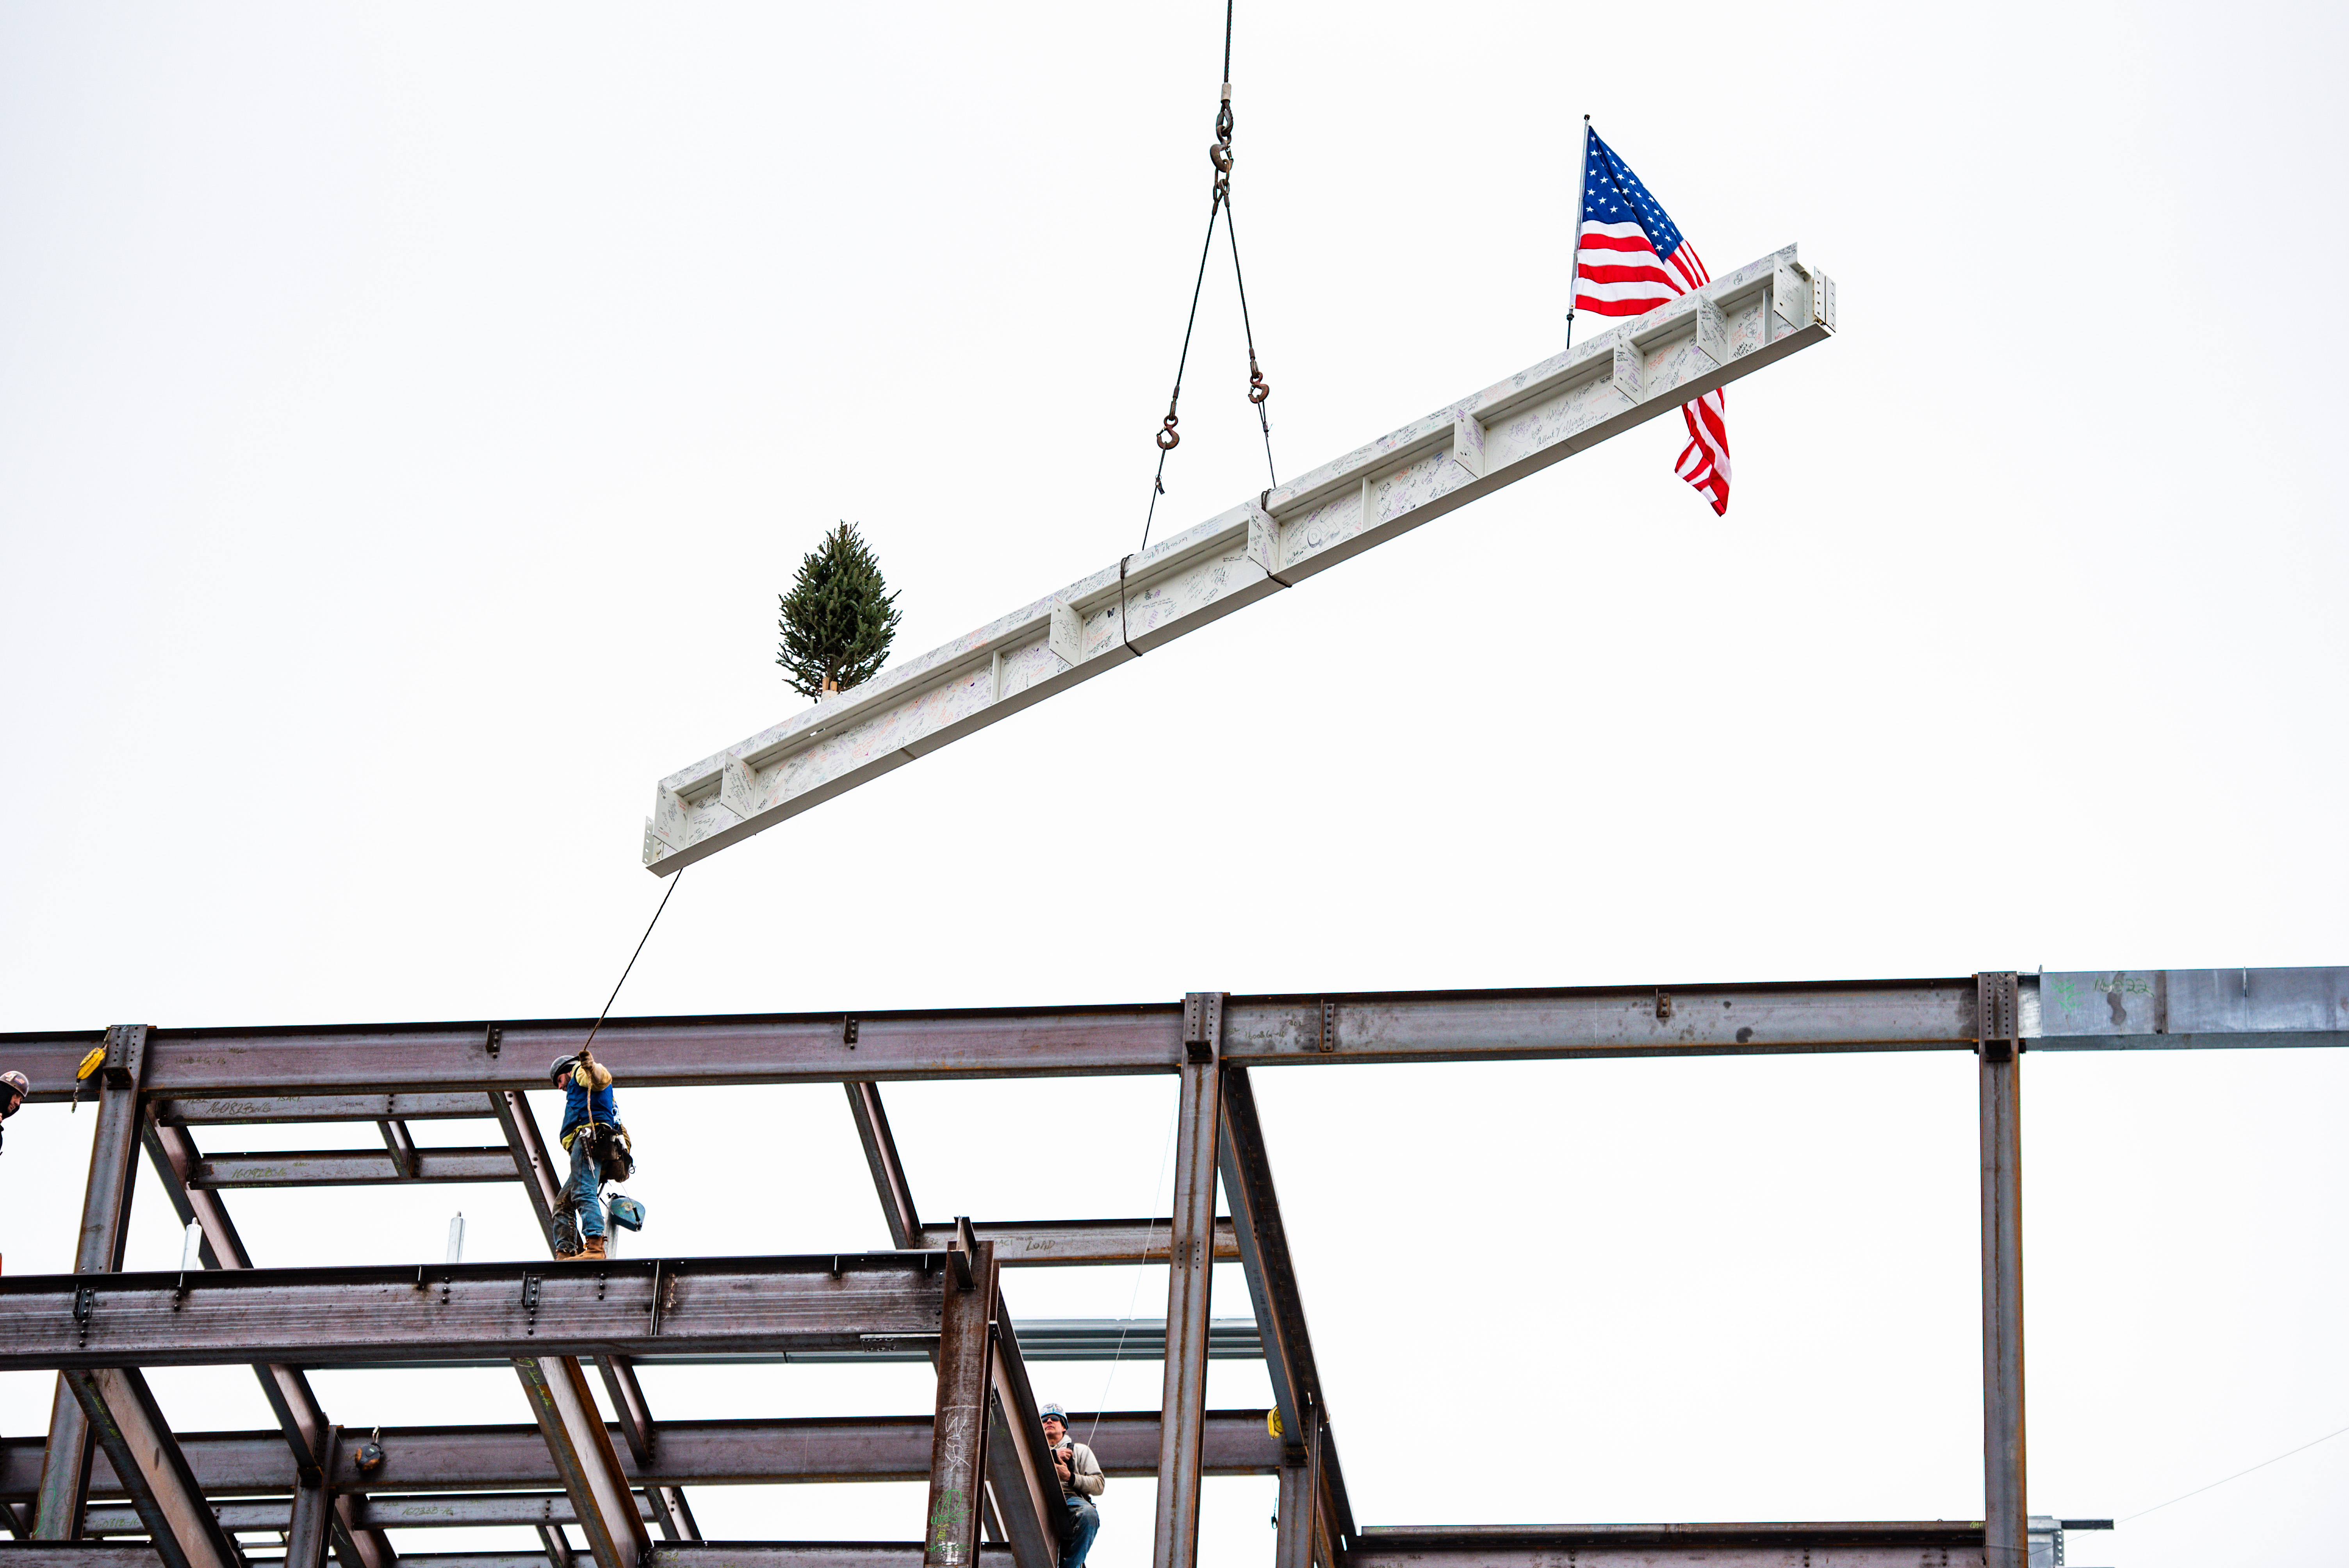 Jefferson Health Steel Topping Ceremony